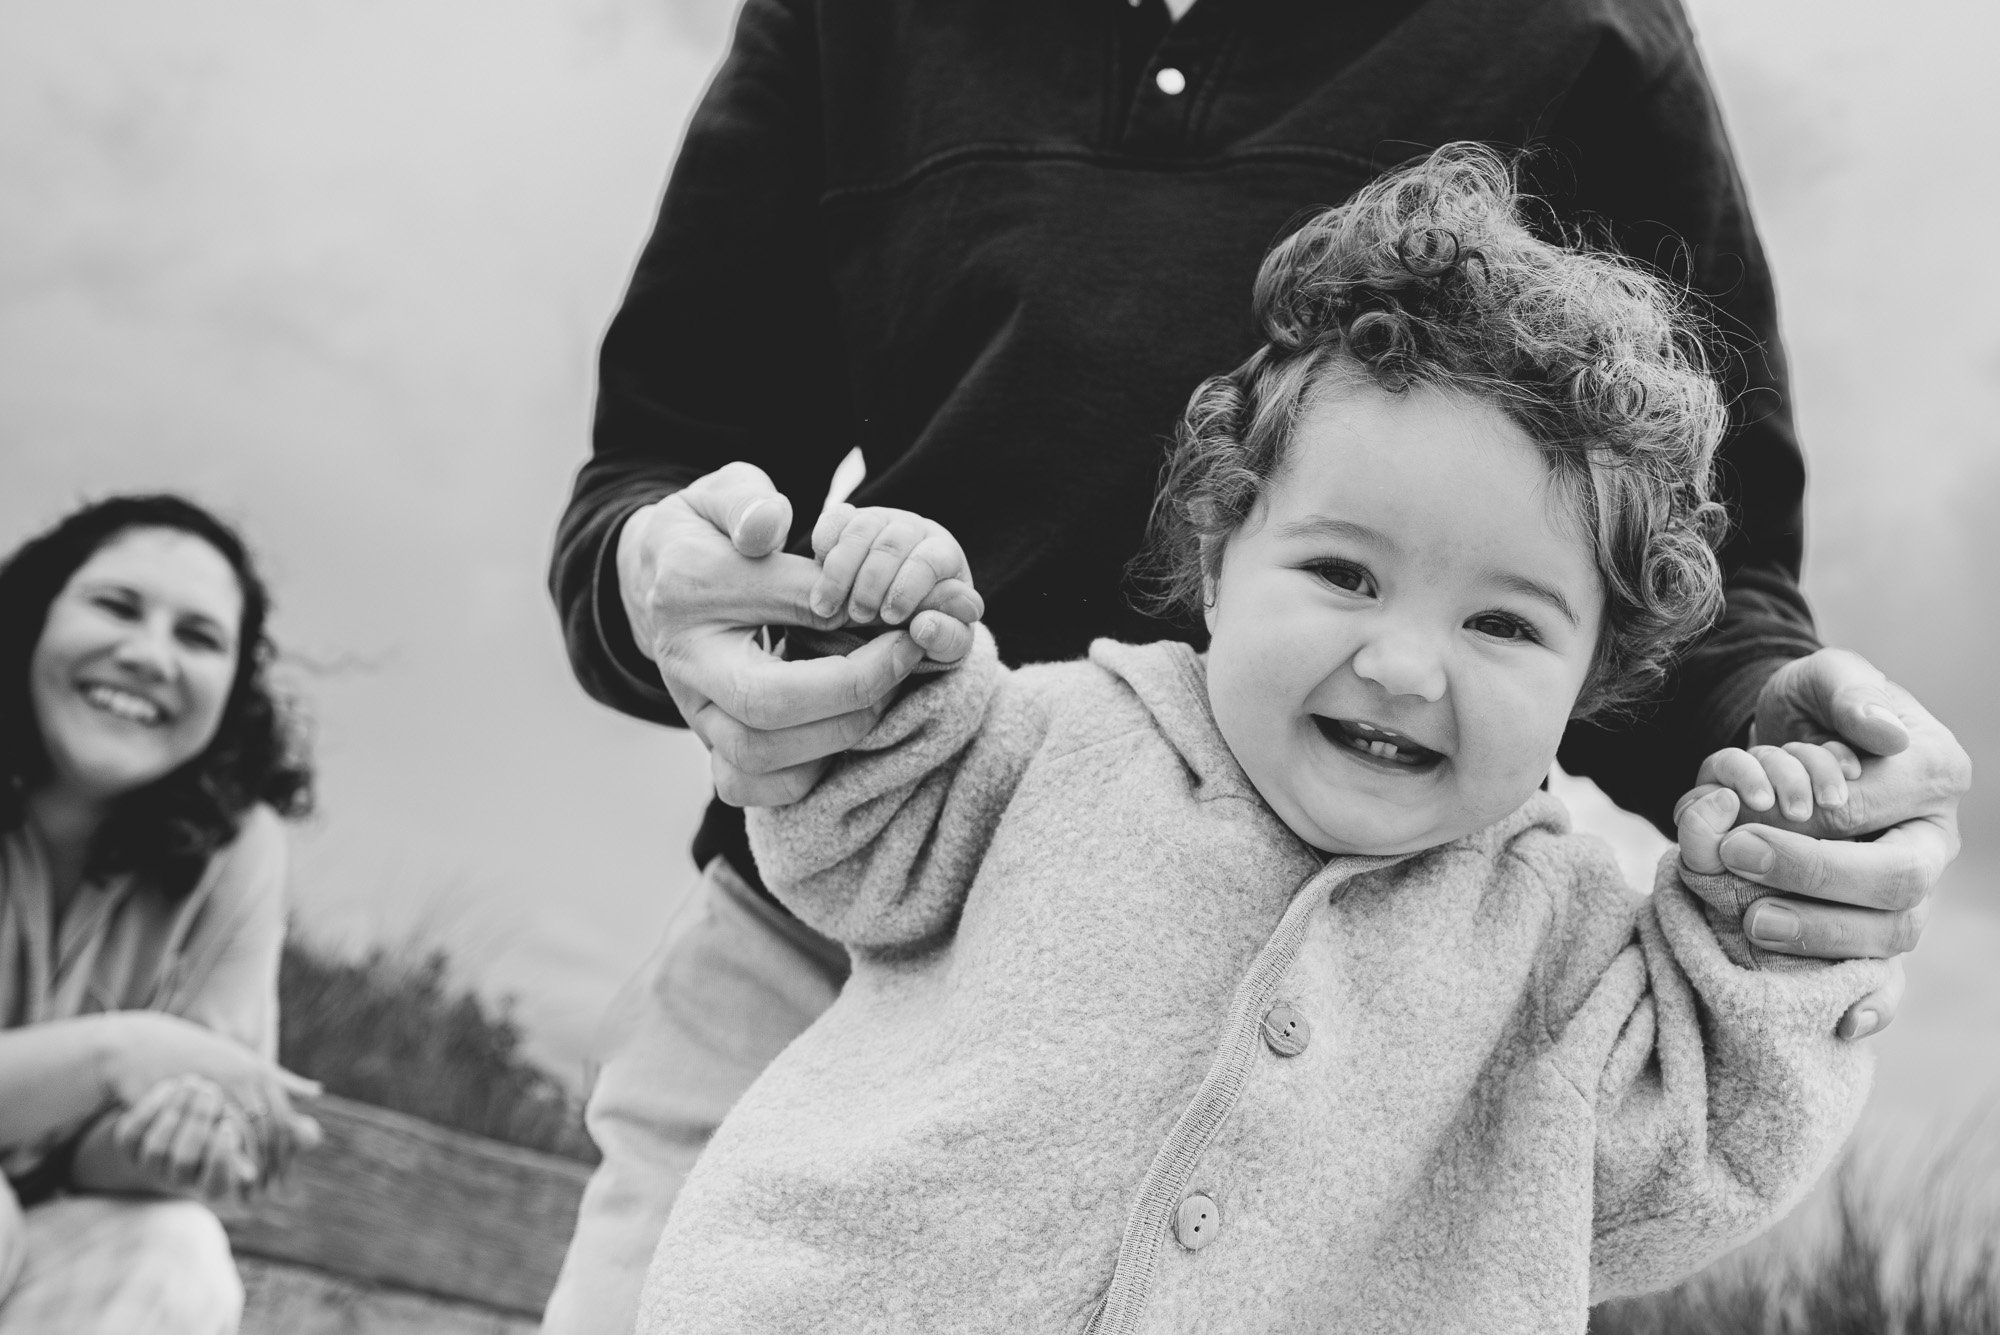 natural-family-portrait-black-and-white-girl-smiling-mum-in-background-chichester-family-photography-west-sussex.jpg